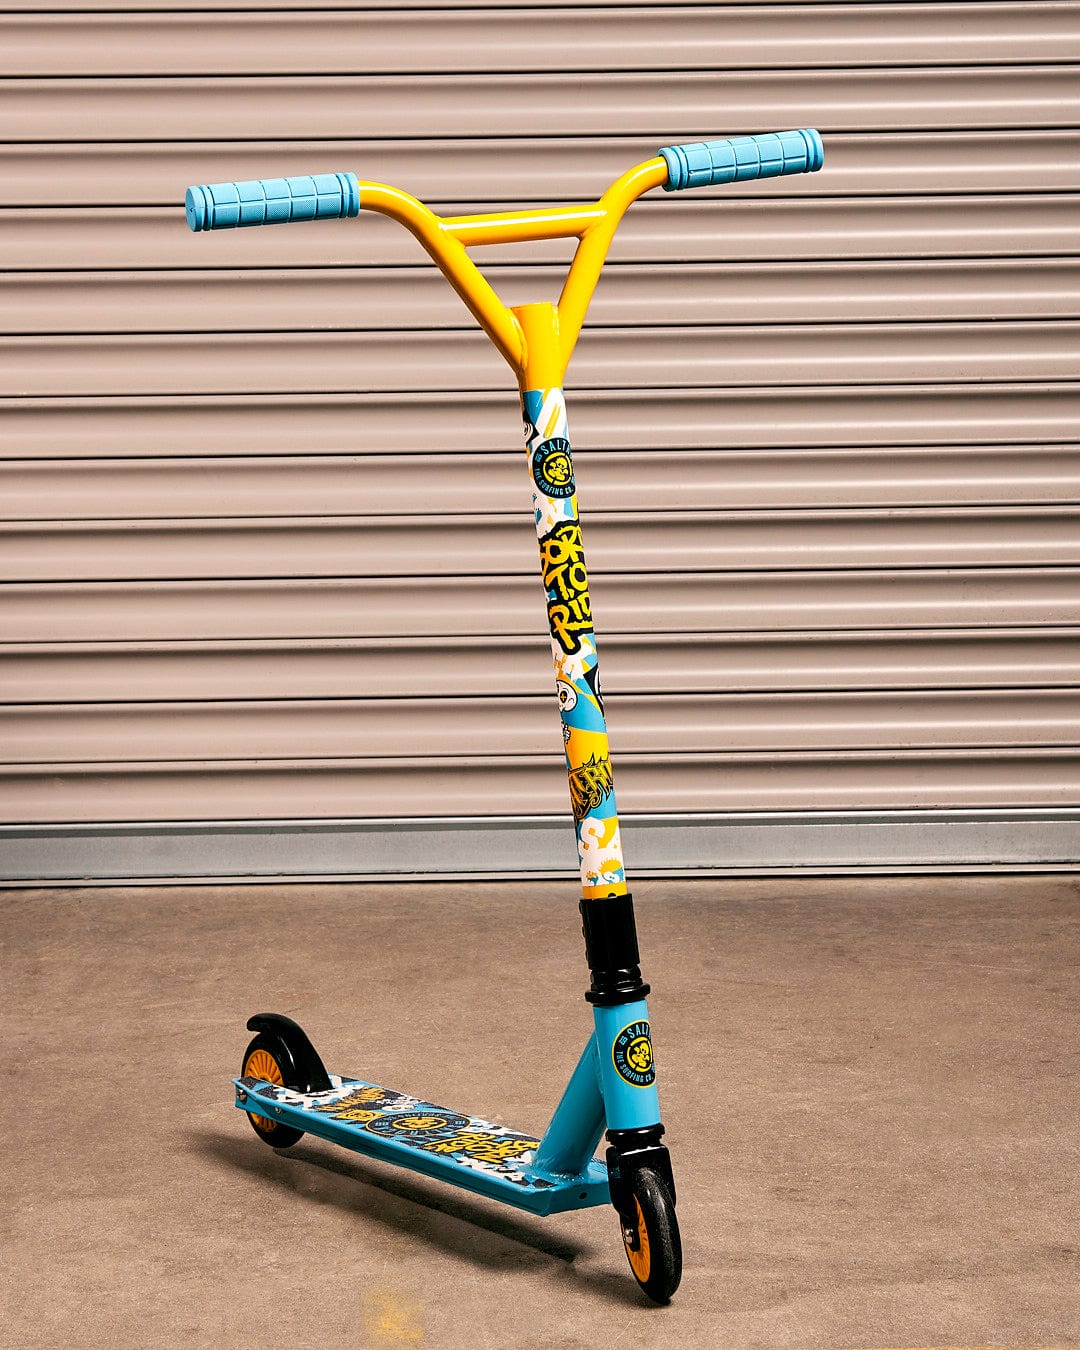 A Saltrock Warped - Stunt Scooter - Blue in front of a garage.